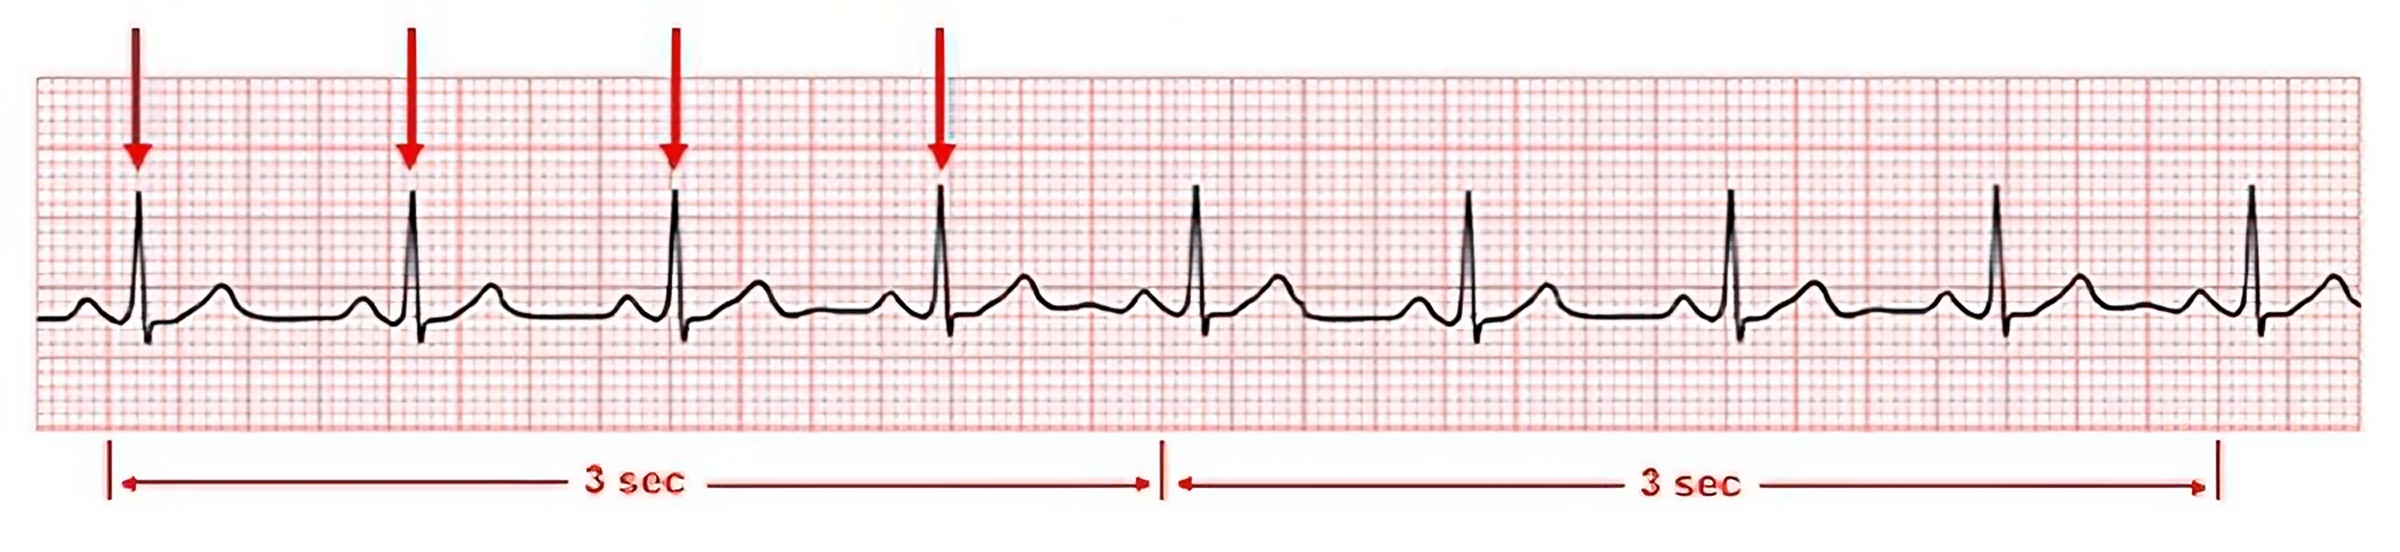 Image of a ecg strip, with arrows, to demonstrate Calculating the Ventricular Rate by Counting the R Waves in a 6-Second Strip